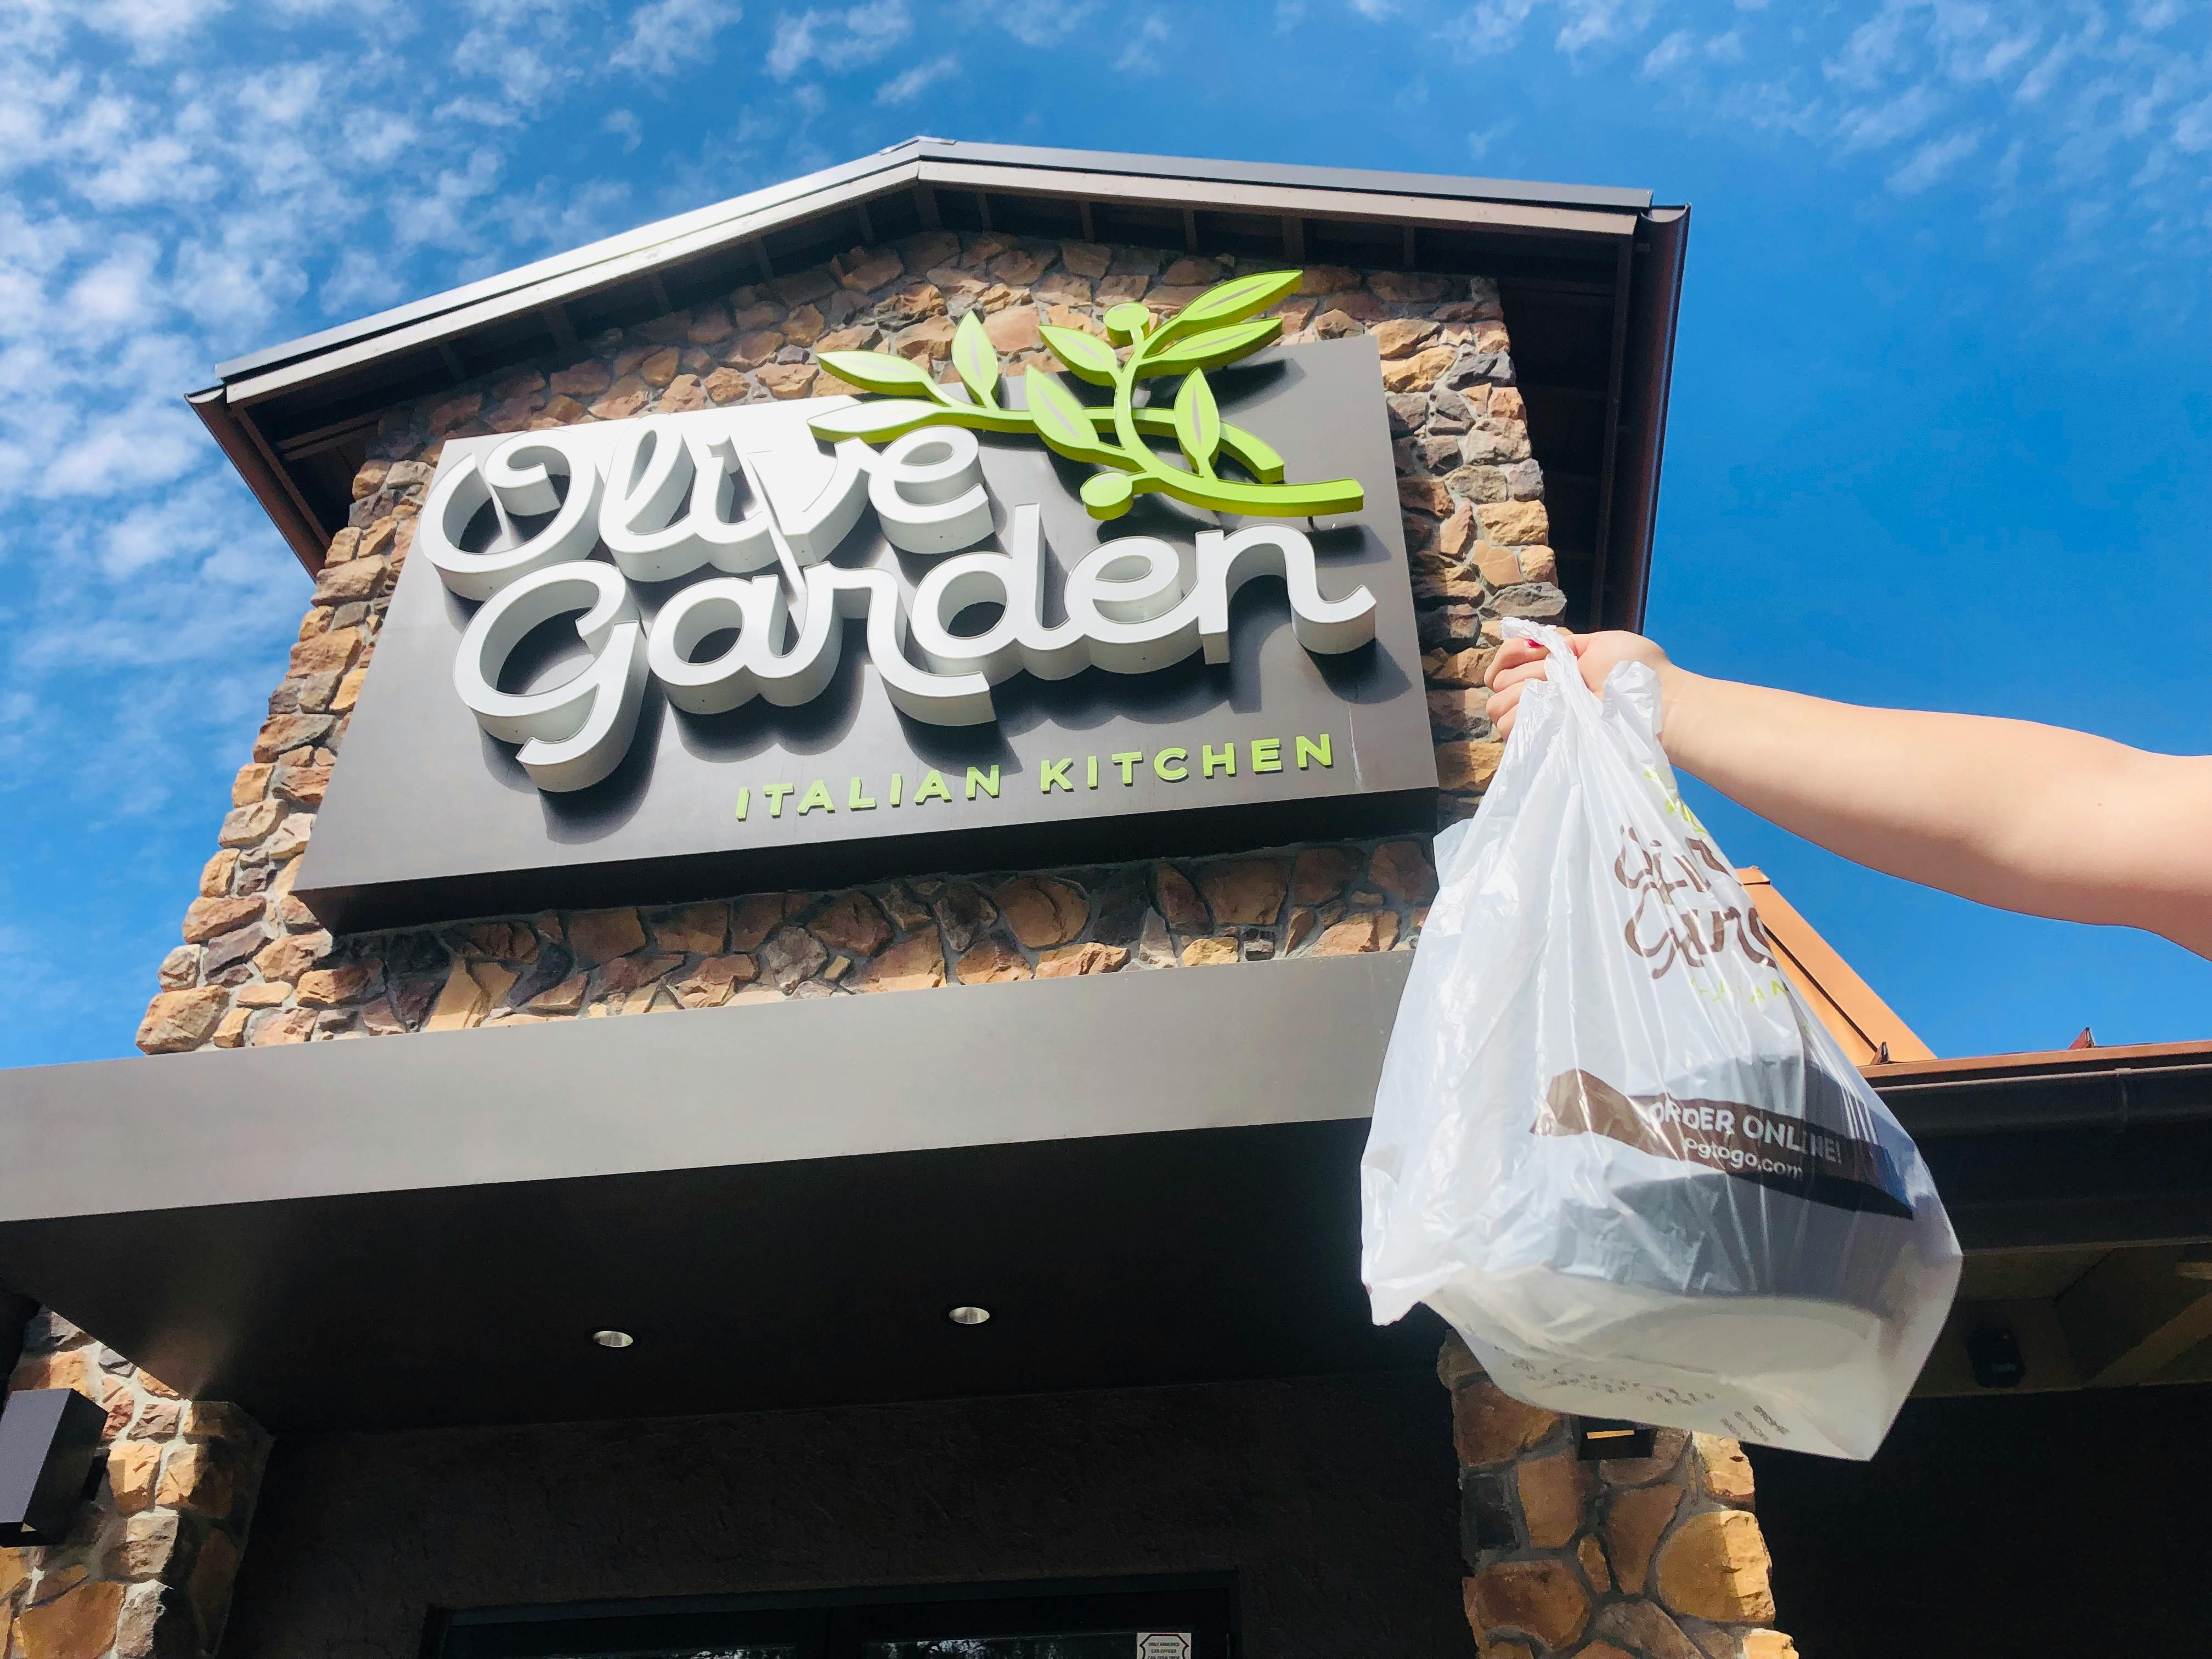 25 Olive Garden Secrets From Your Server That Ll Save You Serious Cash The Krazy Coupon Lady